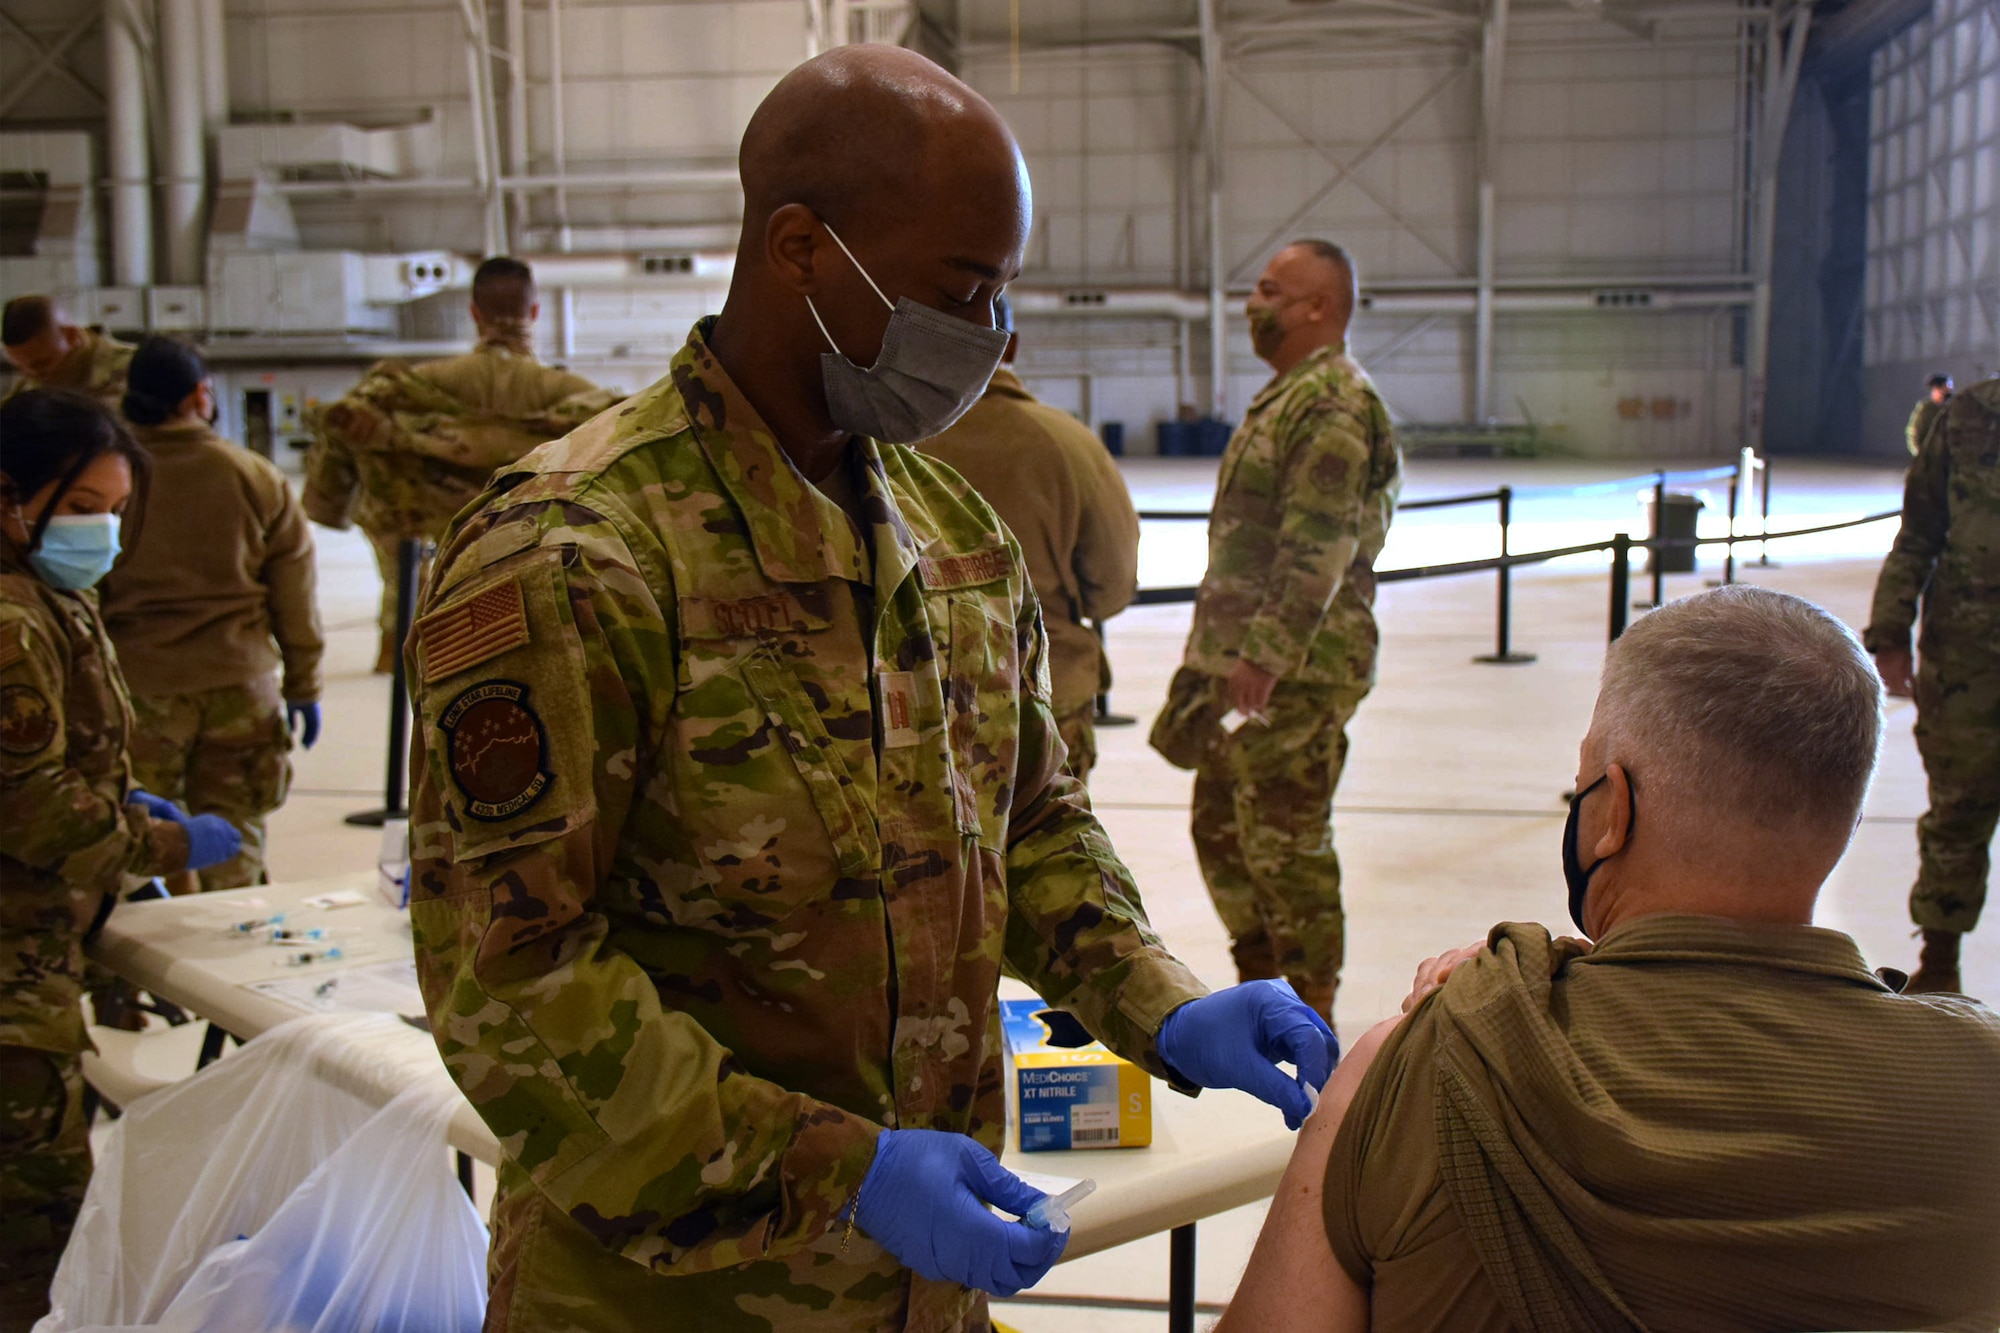 Capt. Albert Scott Jr., 433rd Medical Squadron critical care nurse, administers a vaccine to a Reserve Citizen Airman Nov. 6, 2021 at a mass vaccination event at Joint Base San Antonio-Lackland, Texas. These vaccination clinics are designed to help reduce illness and lost work time. (U.S. Air Force photo by Staff Sgt. Monet Villacorte)